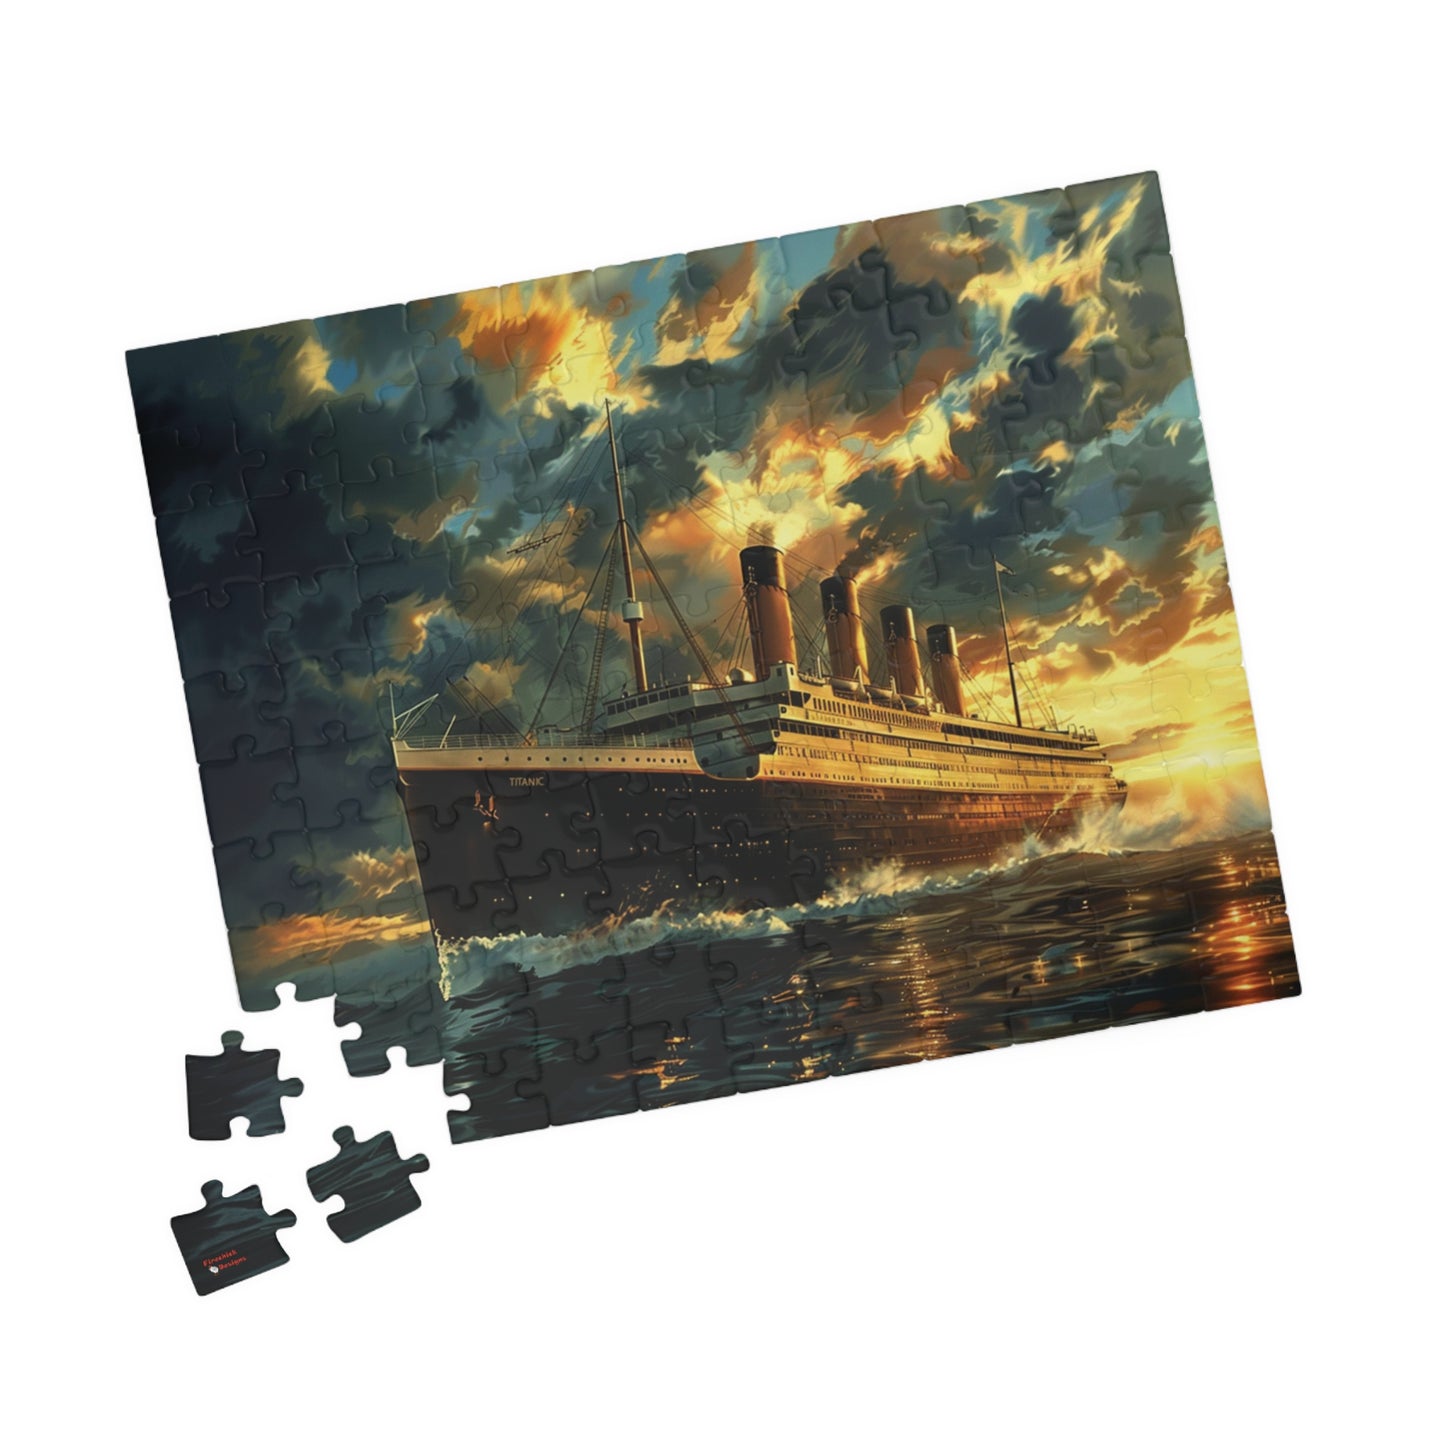 RMS Titanic at Sunset Puzzle (110, 252, 520, 1014-piece) Large Ship Beautiful Scenery Ocean Sea Cruise Maiden Voyage 1000 500 Jig Saw